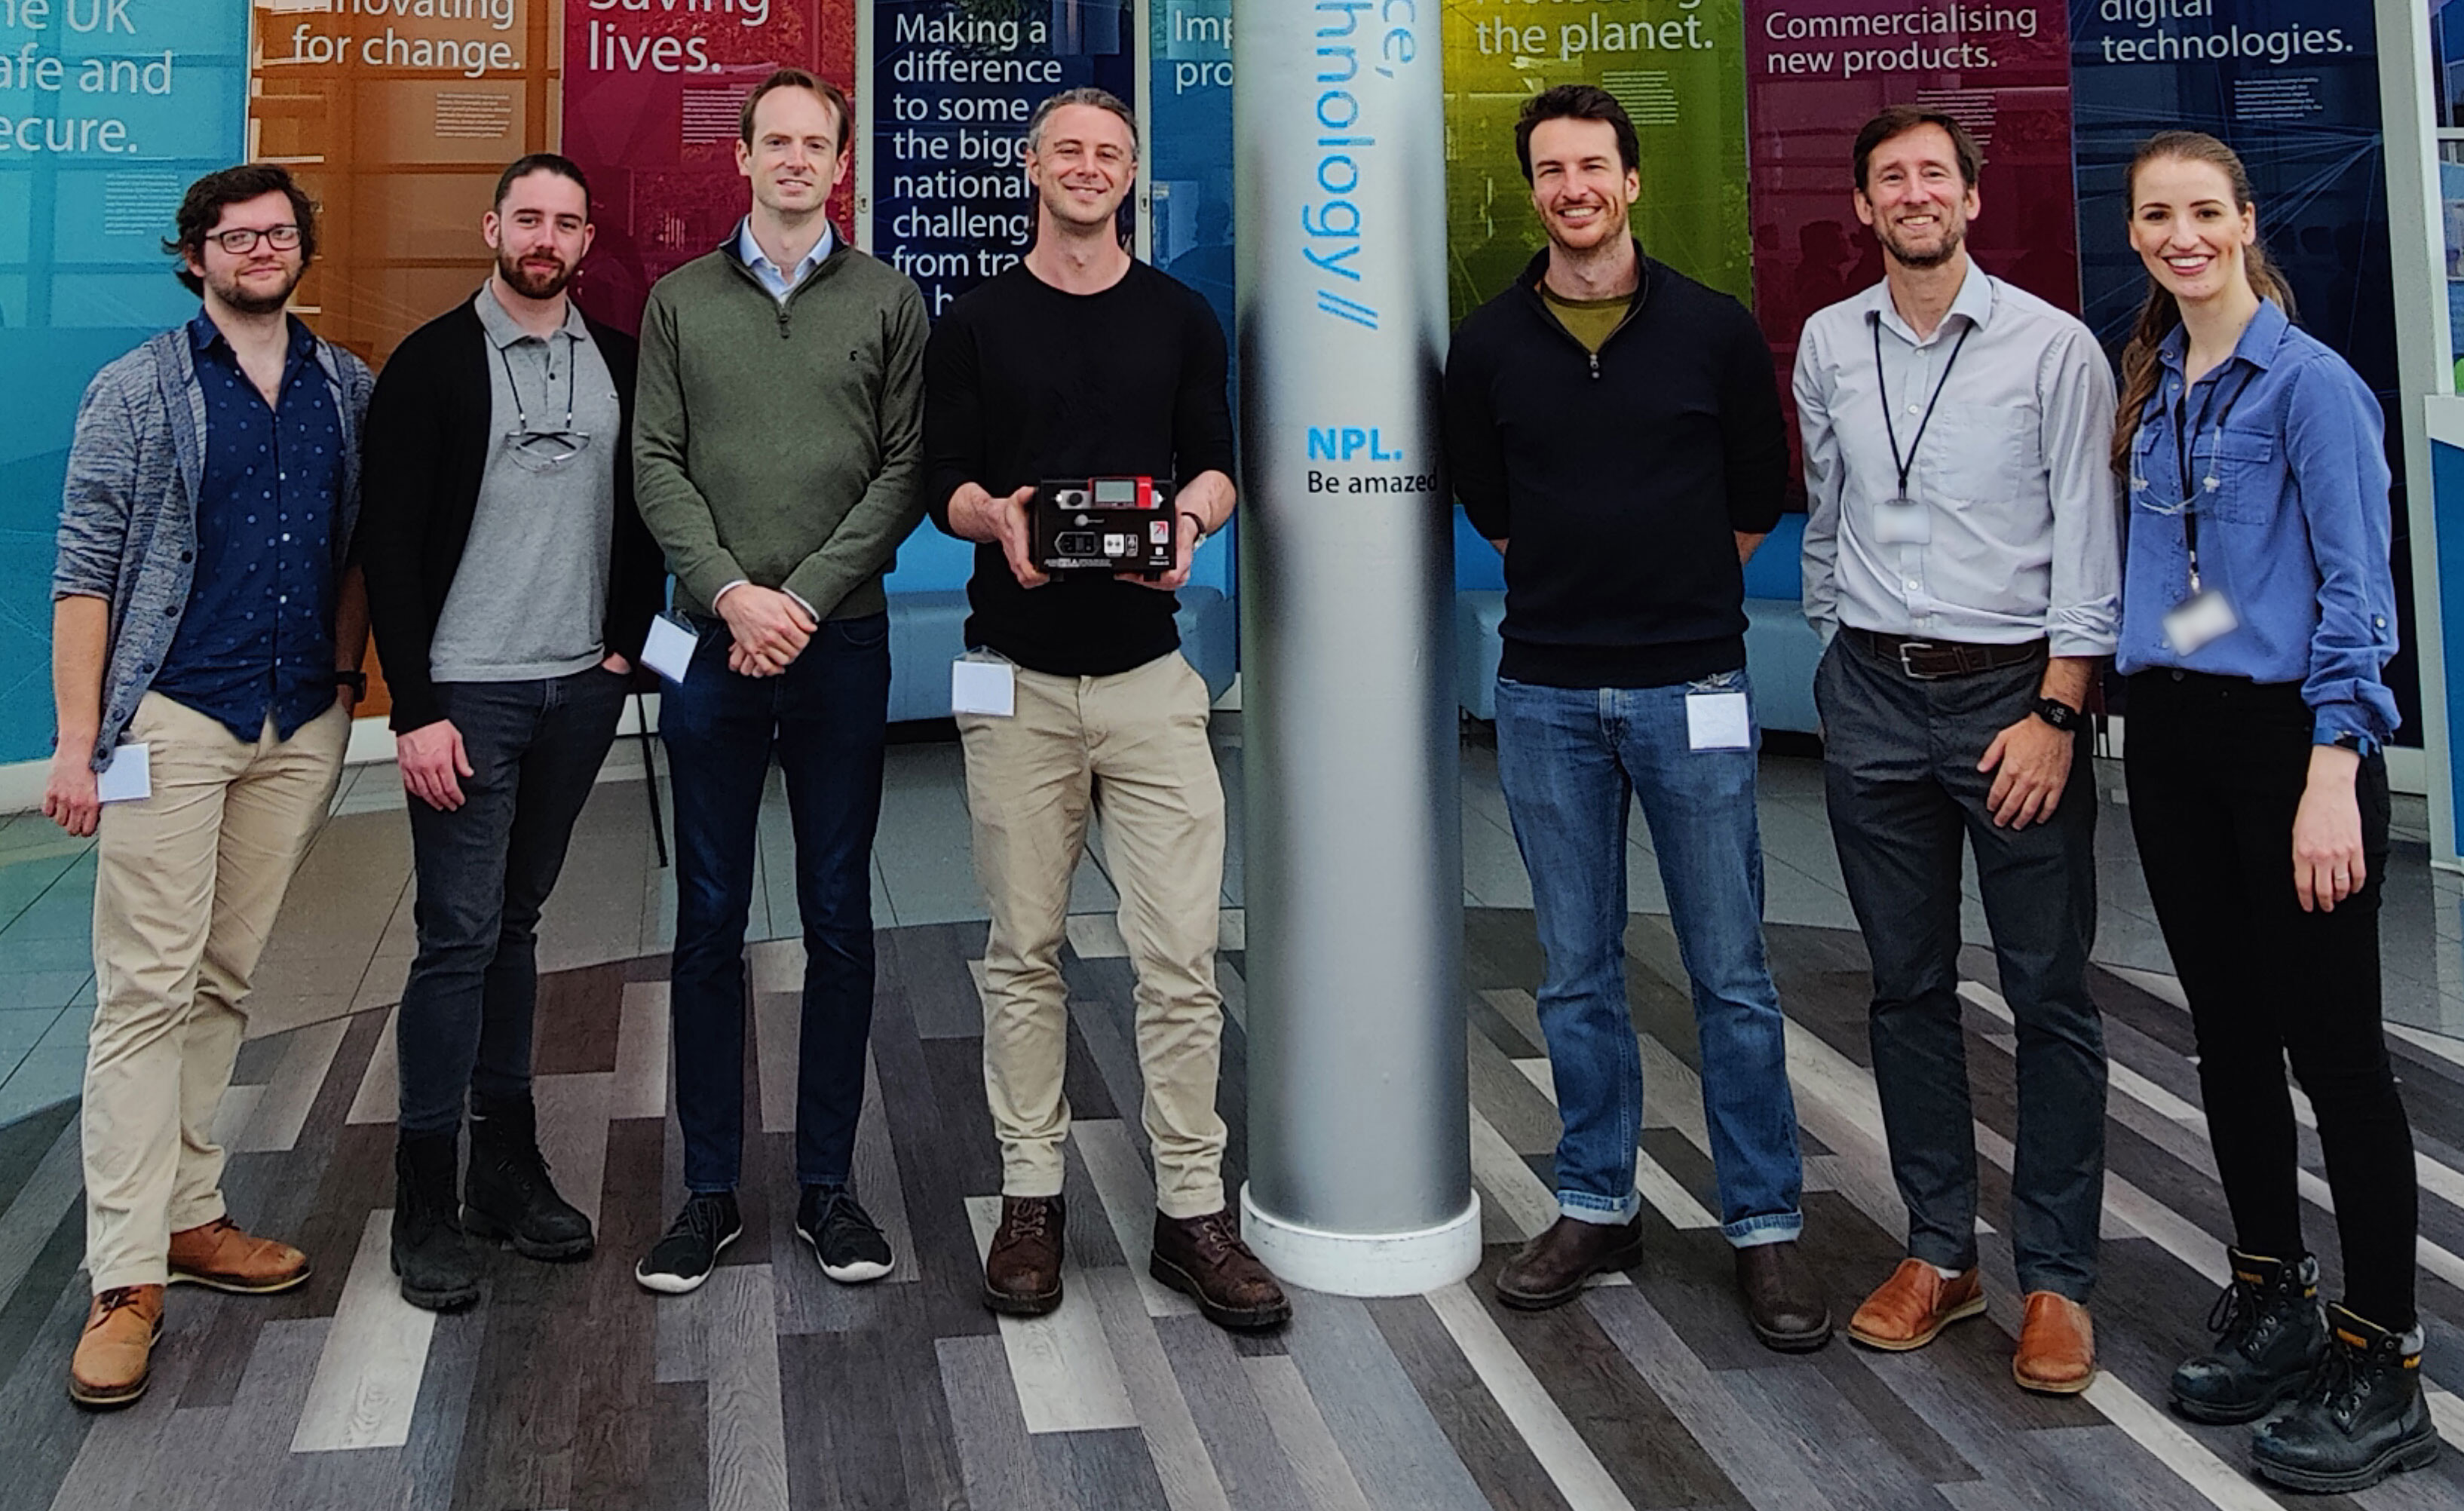 The Fourth State team during their visit to NPL alongside members of the Gas Metrology group. From left to right; Phillip Thomas, joint PhD student from the University of Surrey and Fourth State; Calum Bavin, Gas Metrology Scientist; Gavin Sandison, Fourth State VP of Engineering; Thomas Harle, Fourth State CEO and Founder; Tom Wantock, Fourth State Research and Innovation Manager; Dave Worton, Gas Metrology Principal Scientist; and Sivan Van Aswegen, Gas Metrology Higher Scientist. Other members of the project team not in the photo are: Nick Martin , Air Quality and Aerosol Metrology Principal Scientist and Rod Robinson, Emissions and Atmospheric Metrology Principal Scientist.